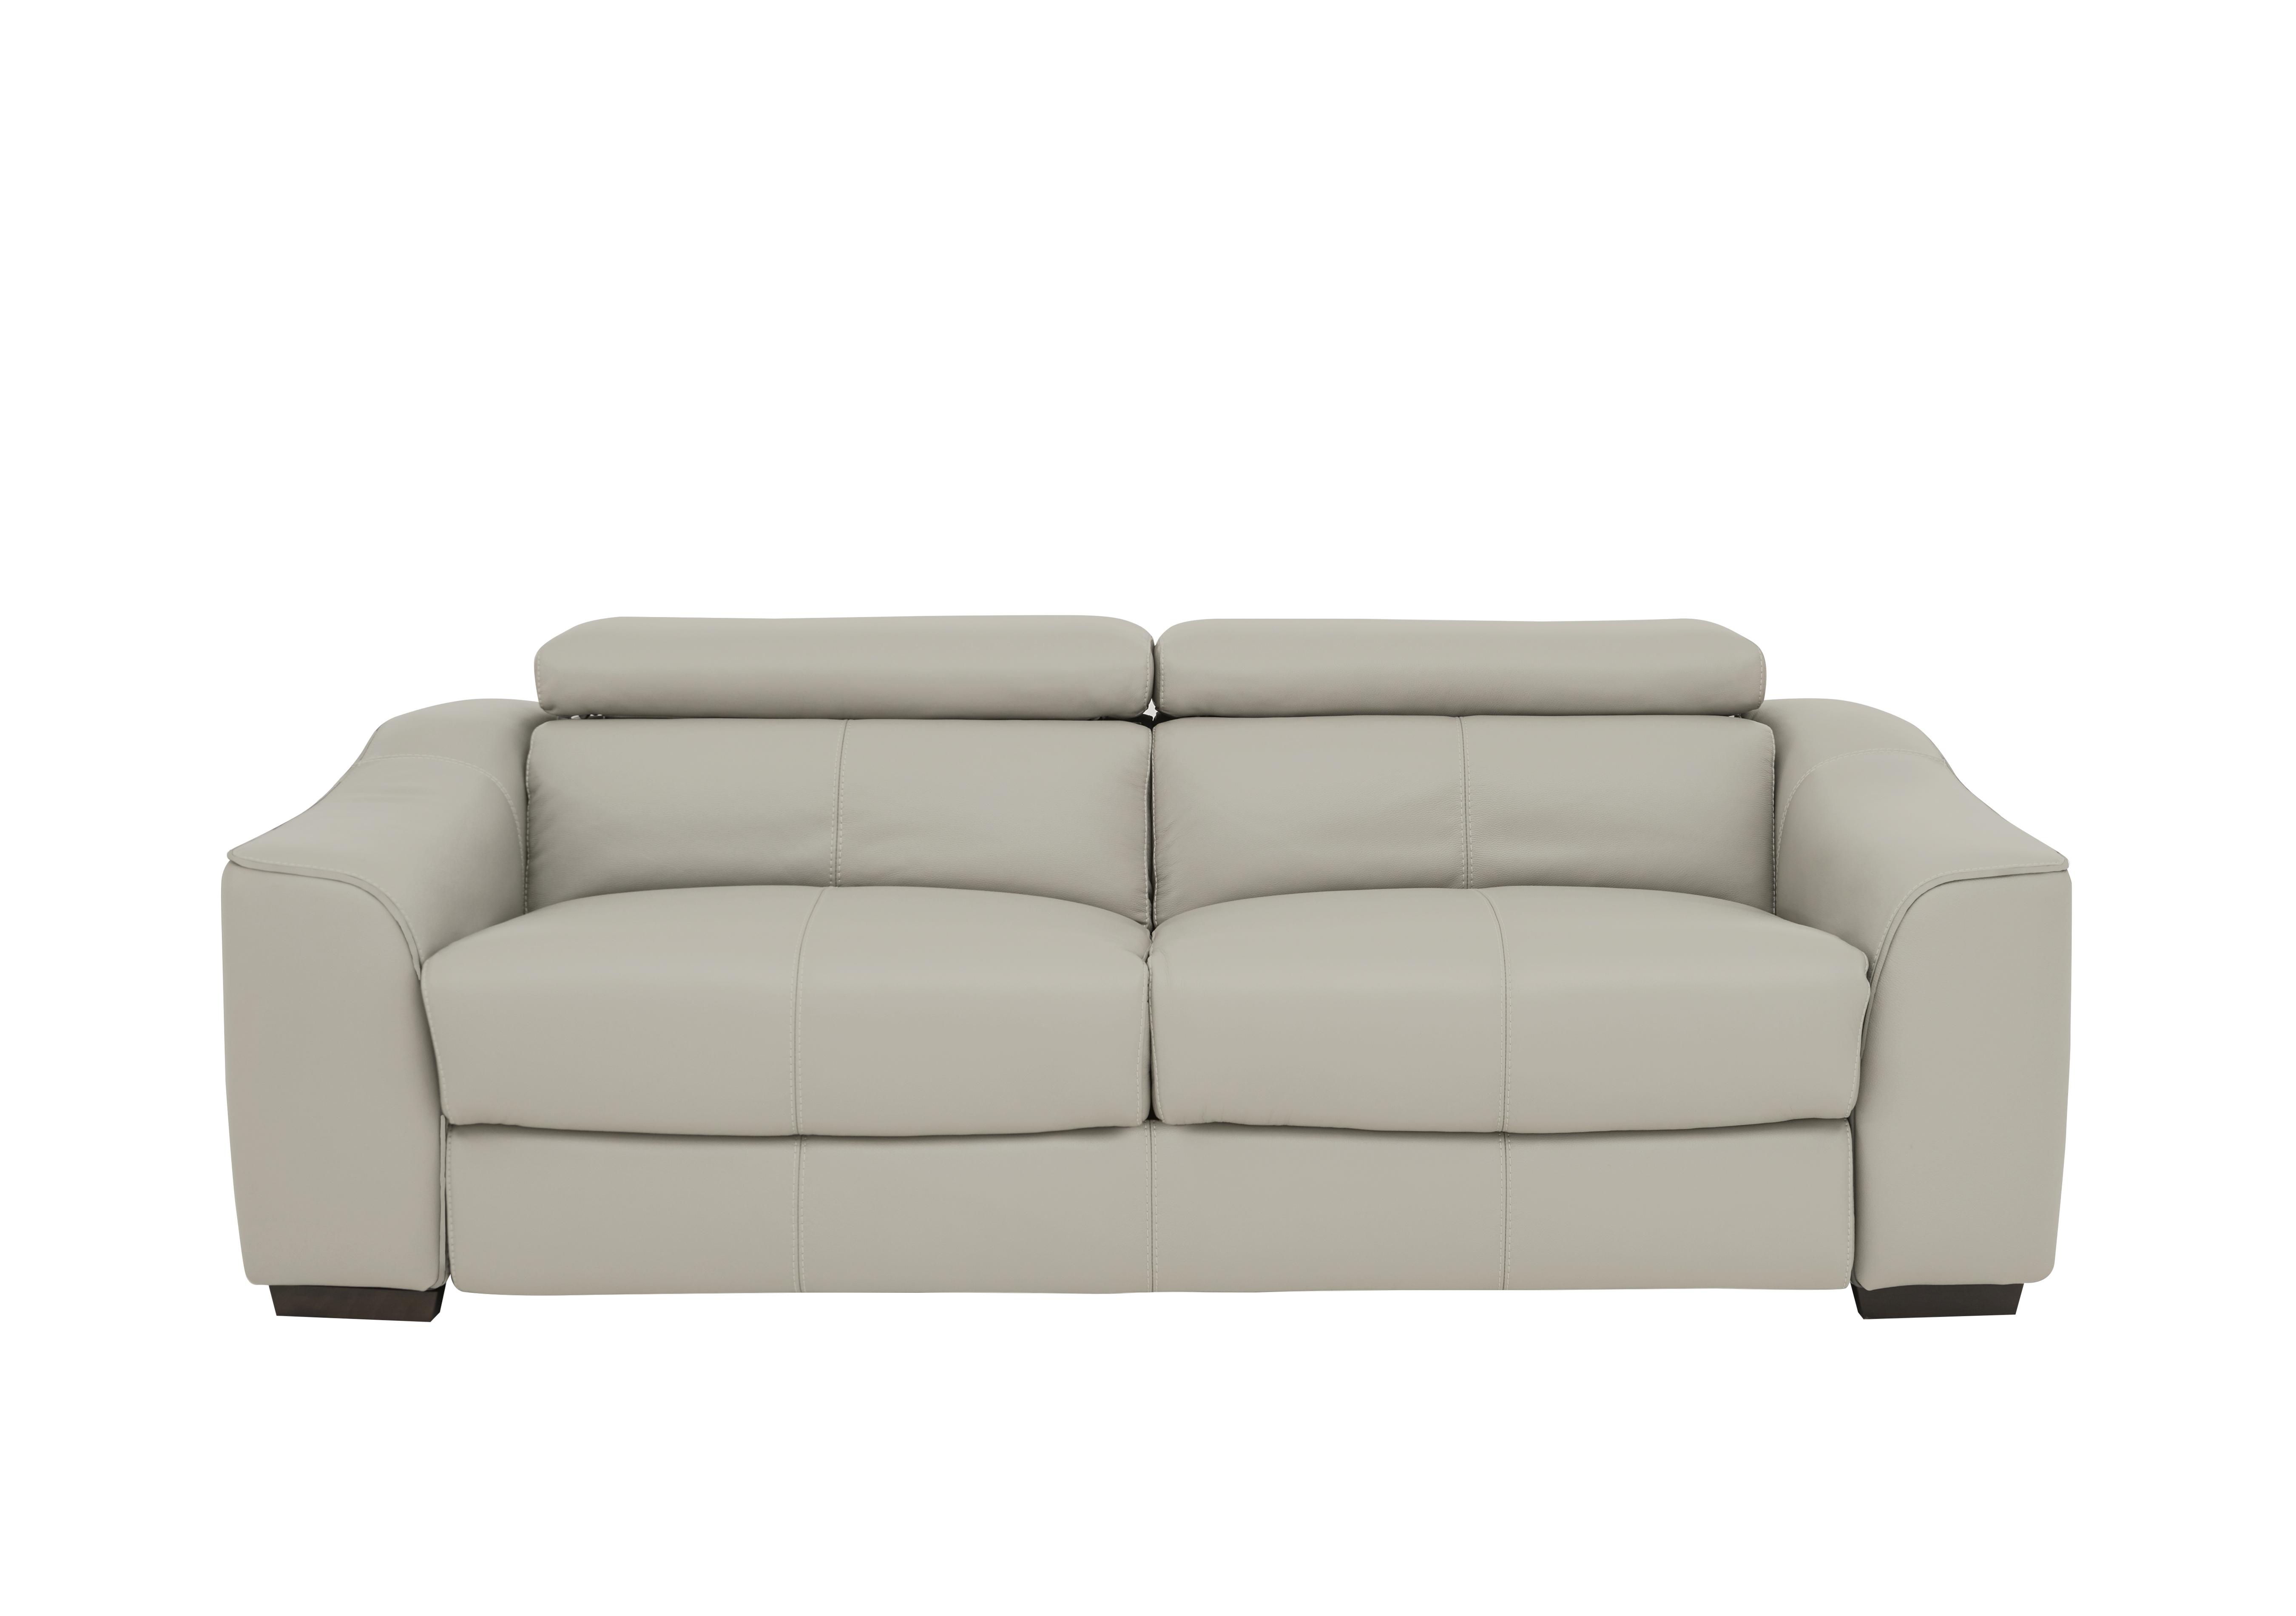 Elixir 3 Seater Leather Sofa Bed in Nc-946b Feather Grey on Furniture Village